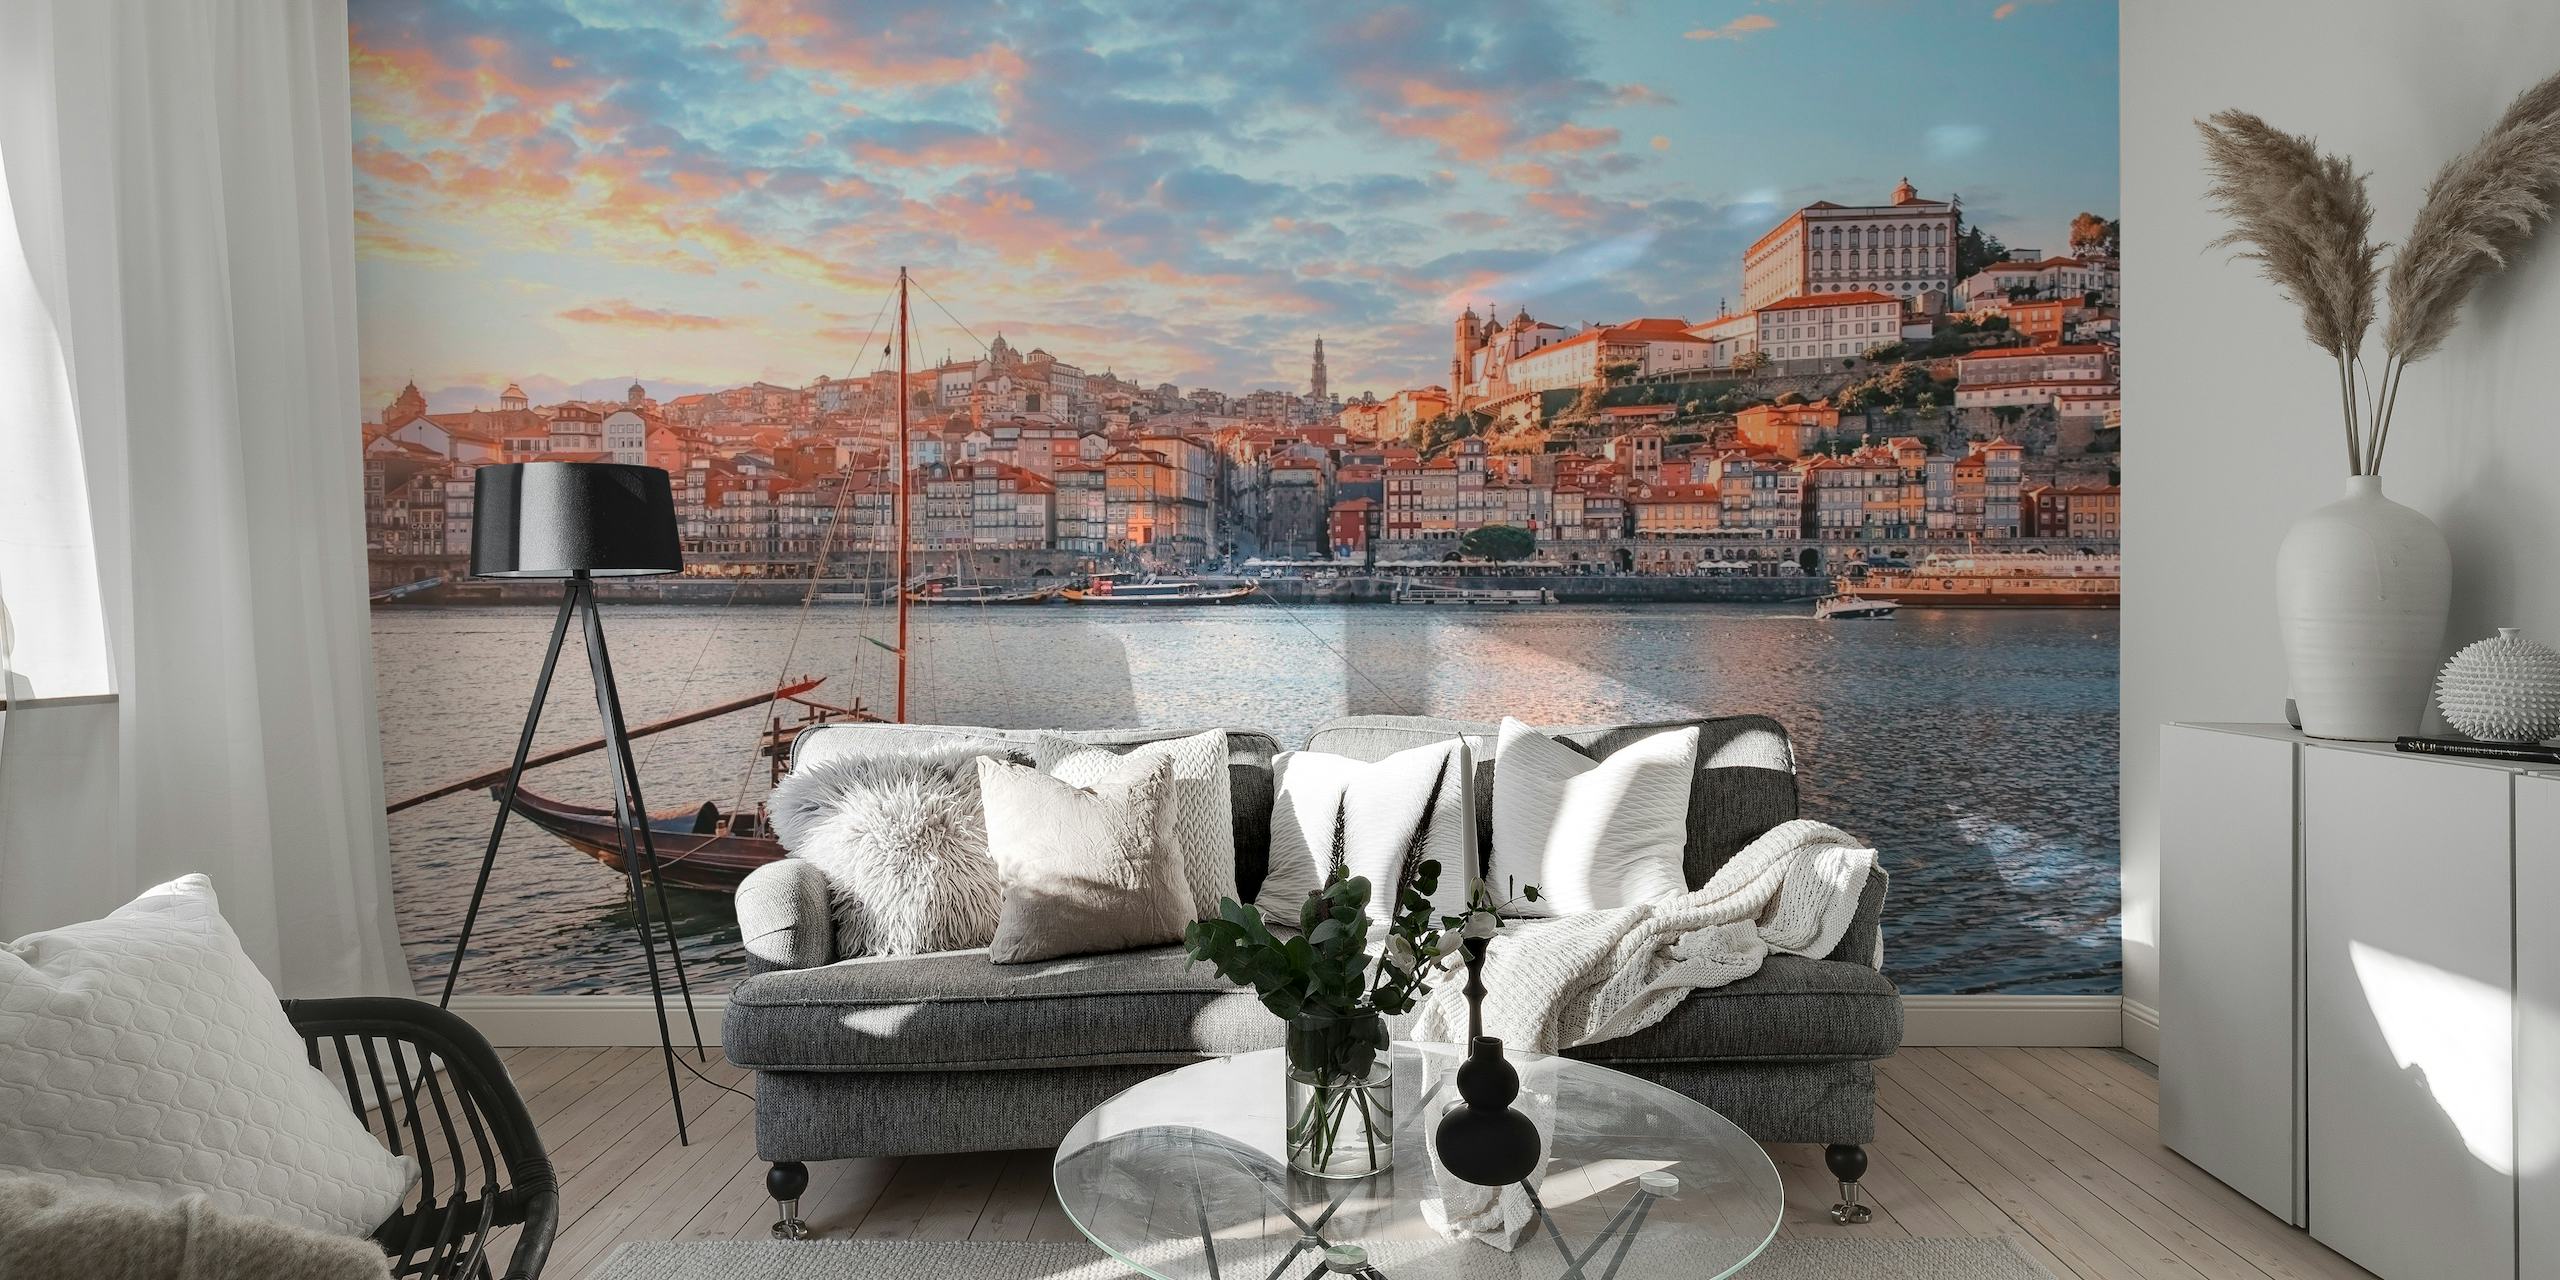 Wall mural of Porto cityscape at sunset with terracotta rooftops and a traditional boat on Douro River